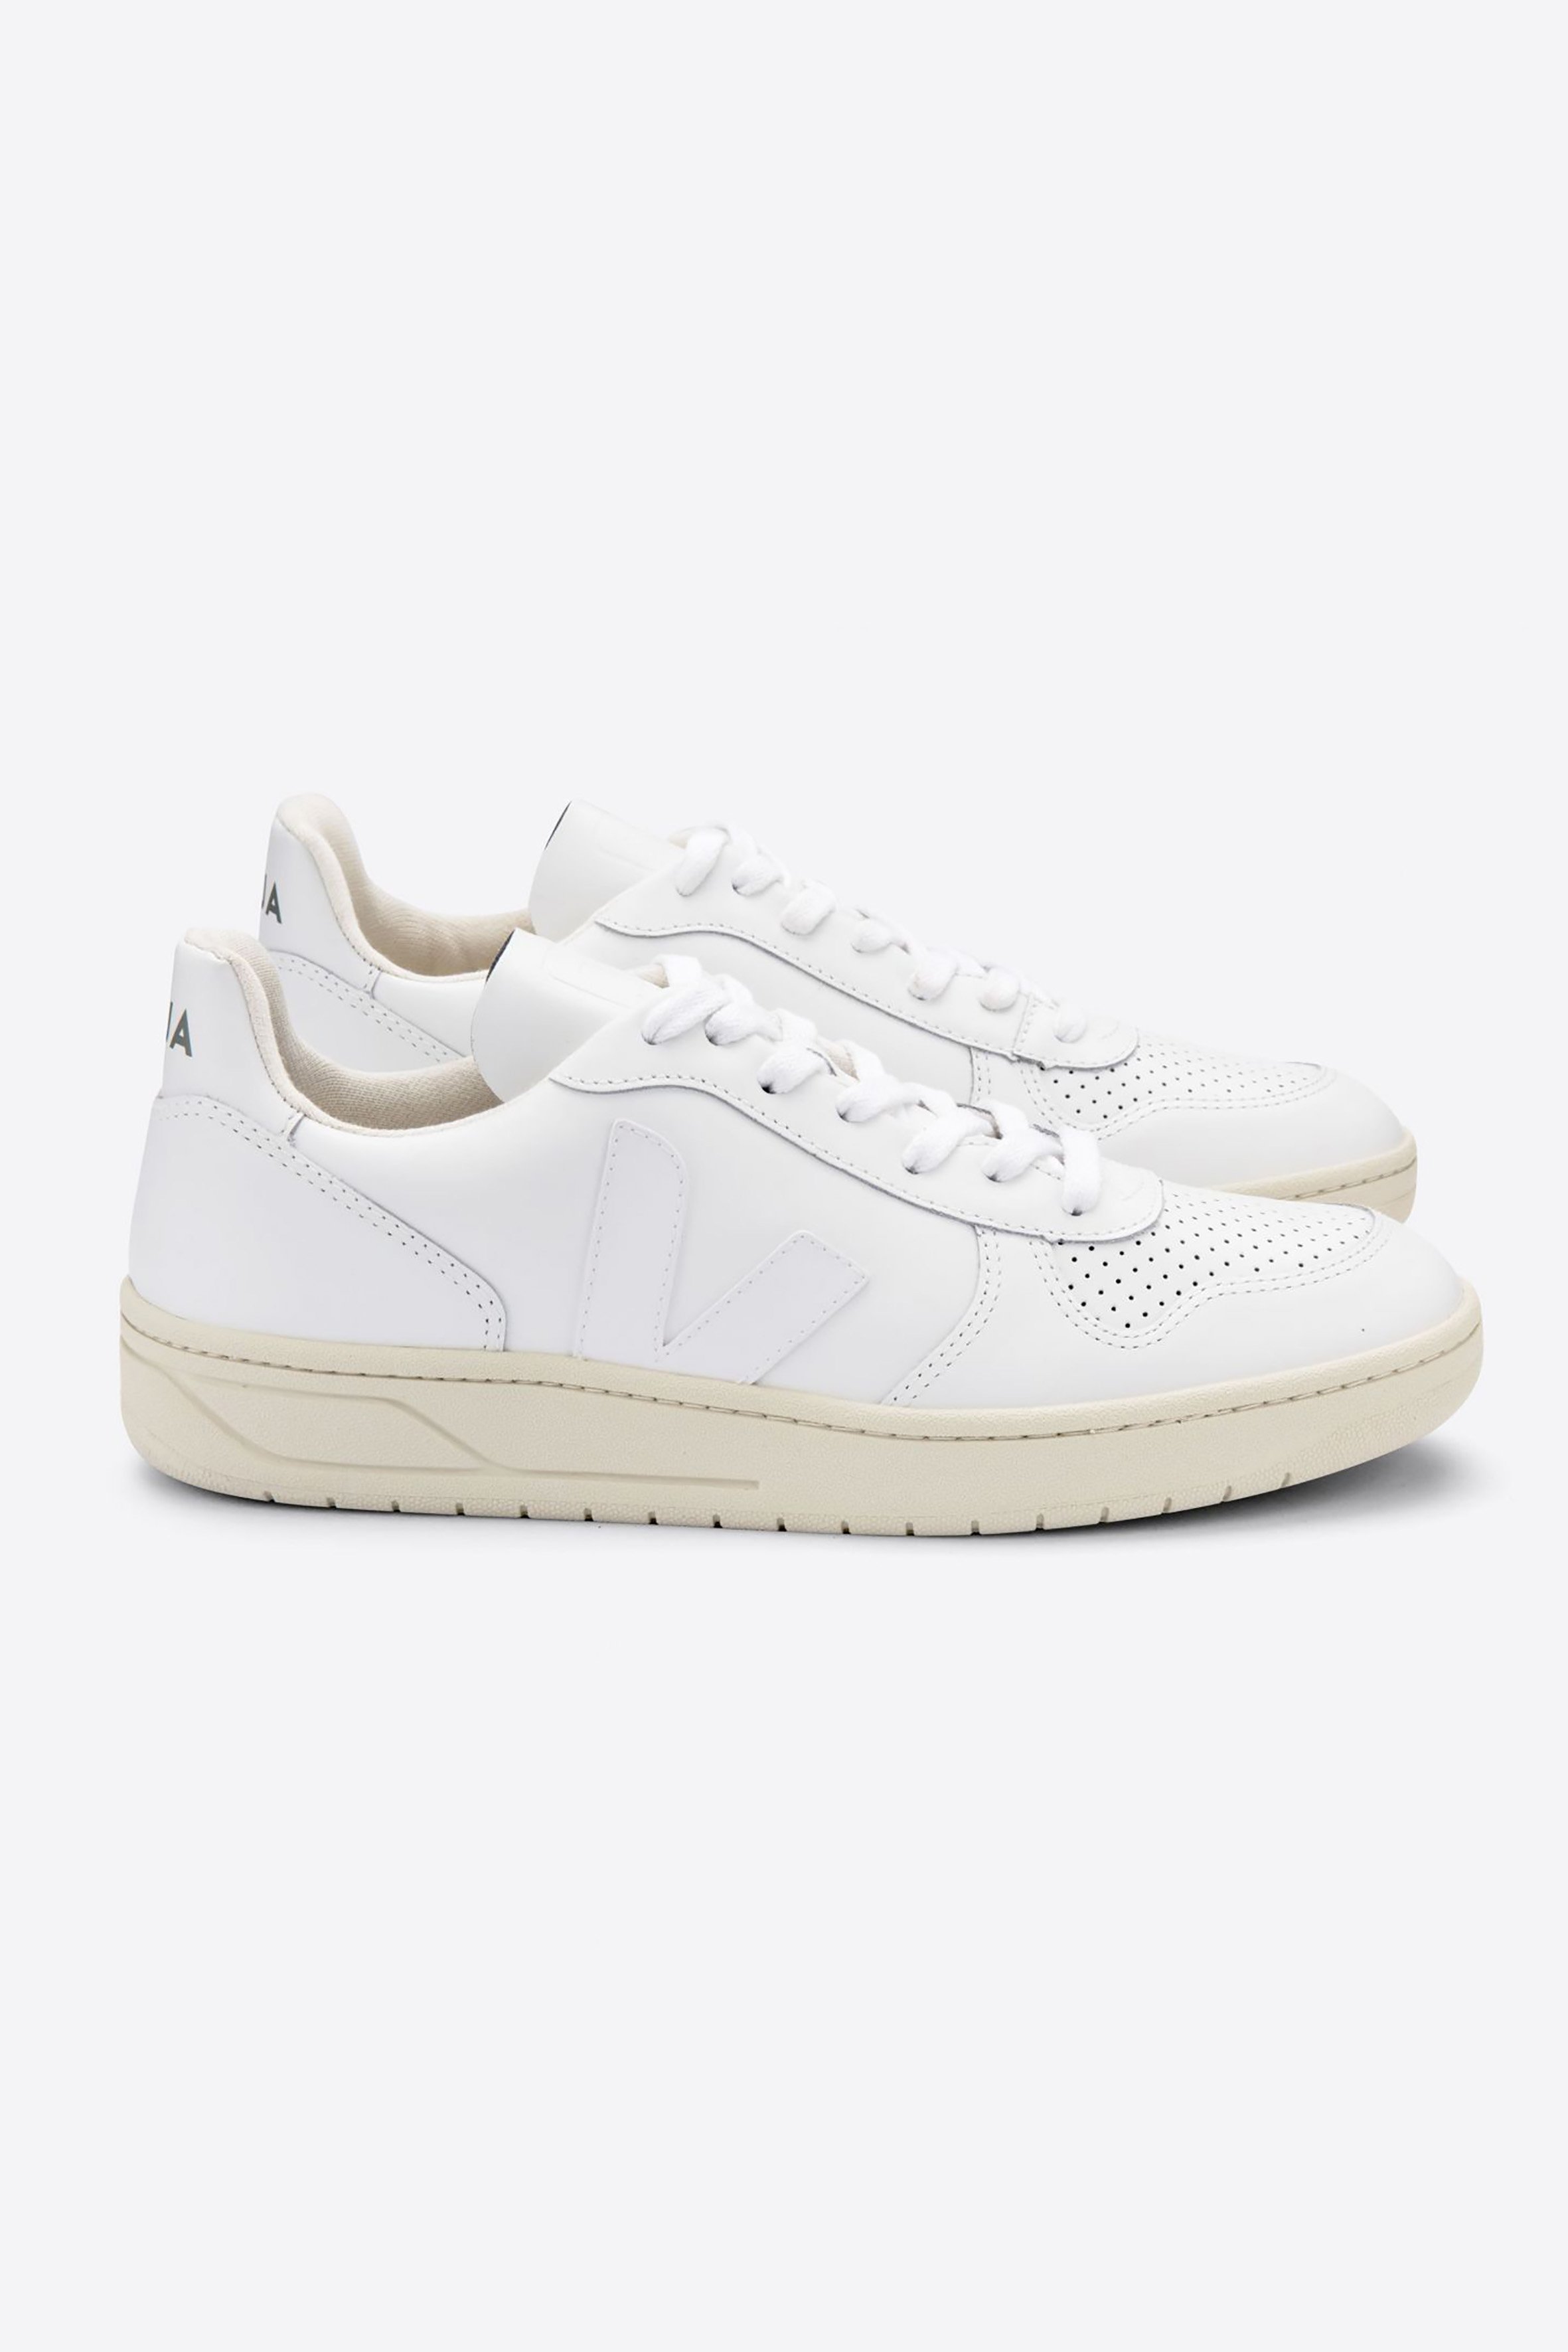 Veja V 10 Leather Trainer Mens(More colours available)